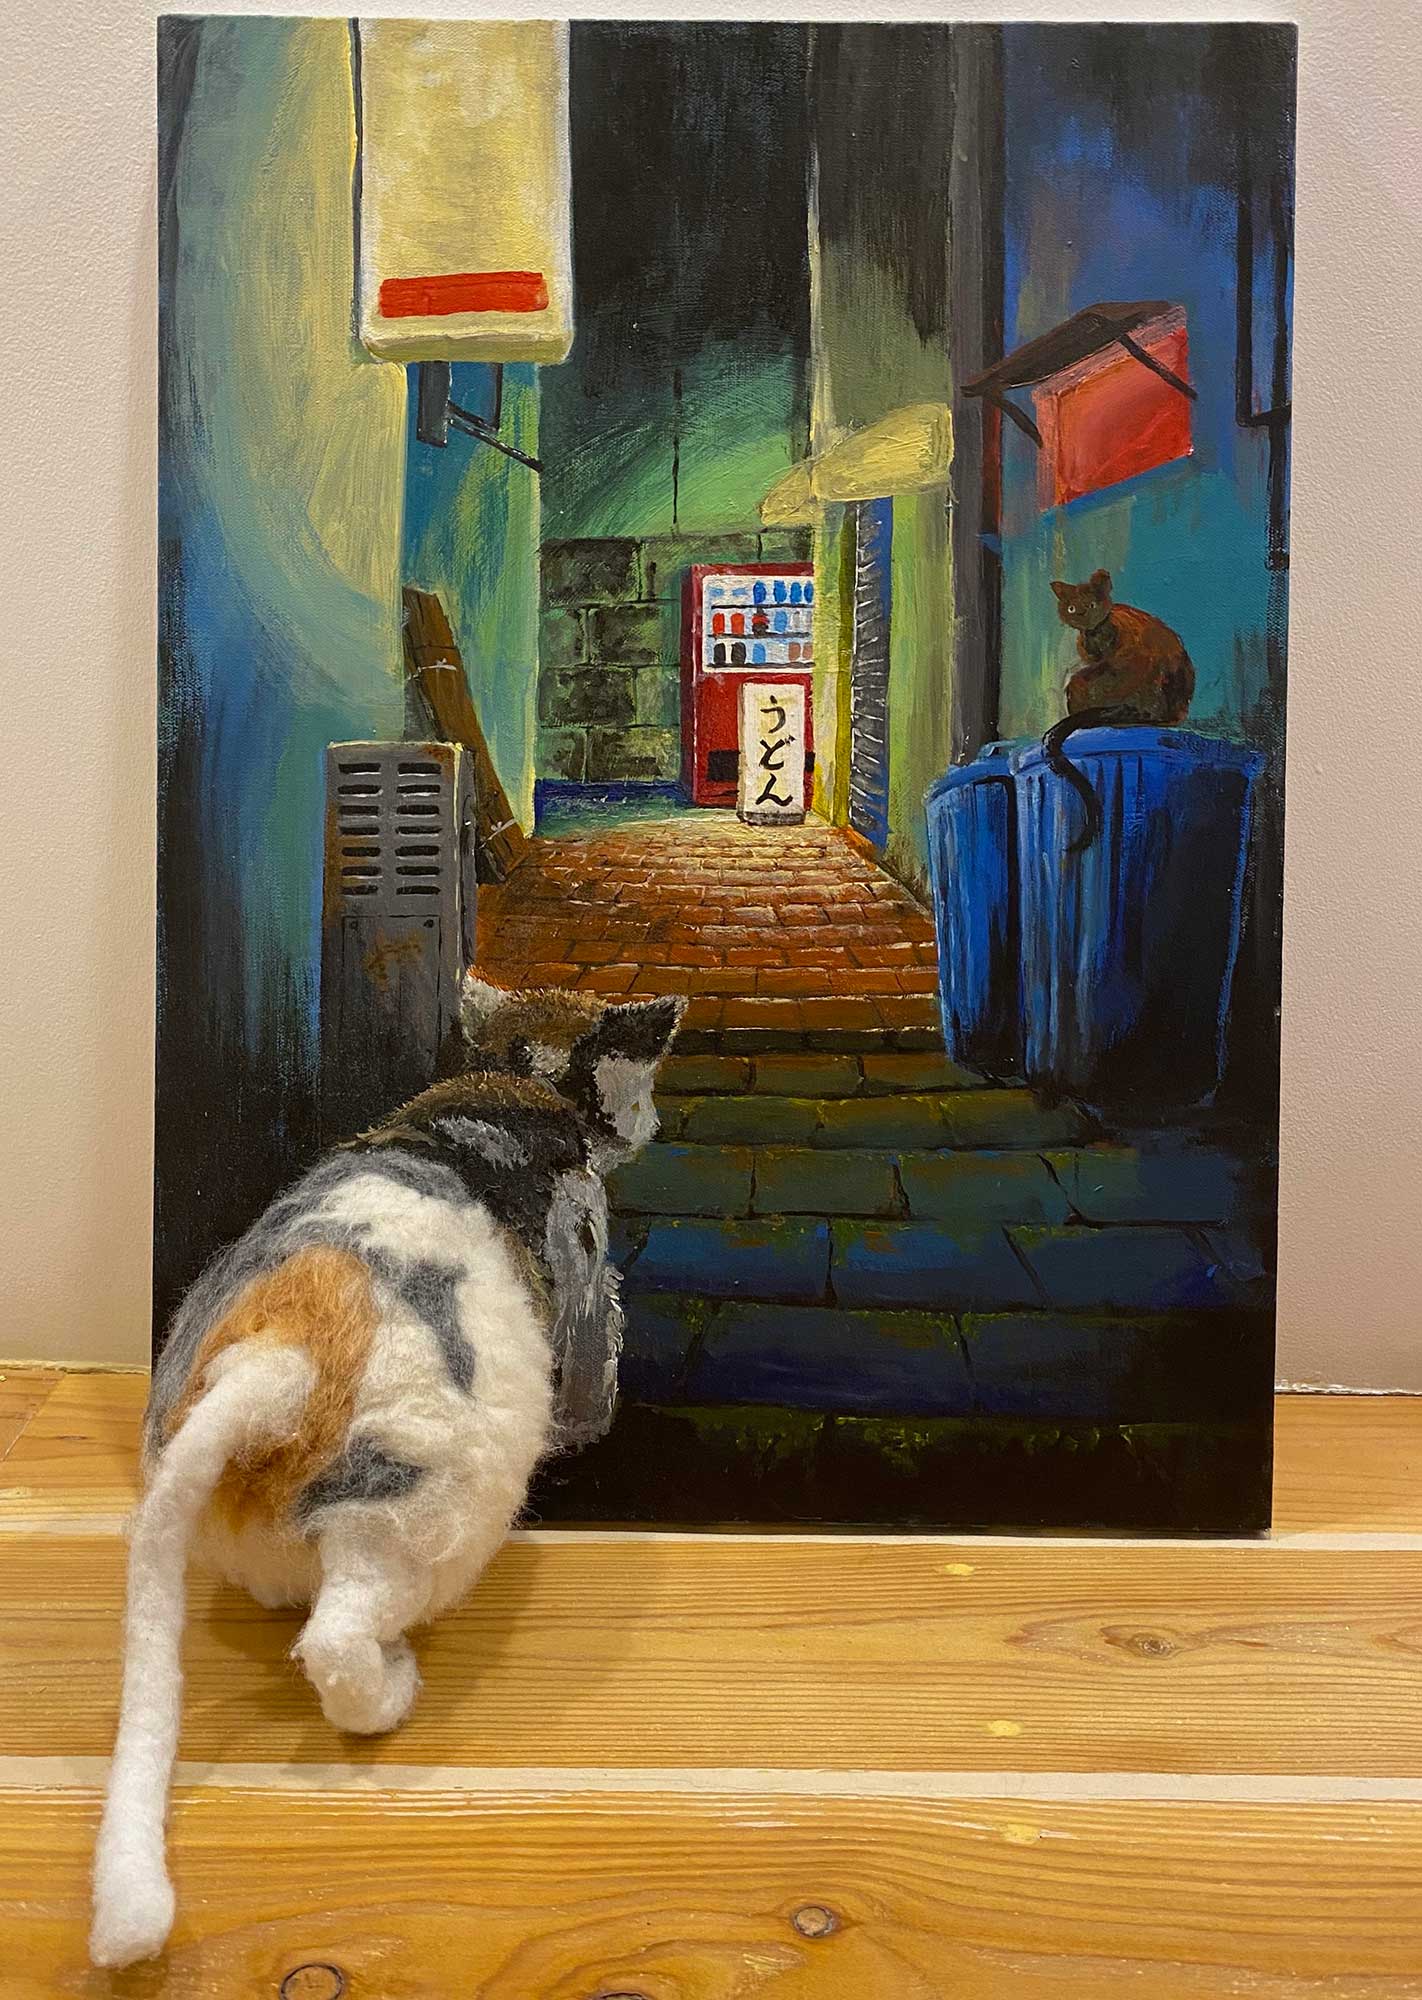 A painting of a city street with a cat